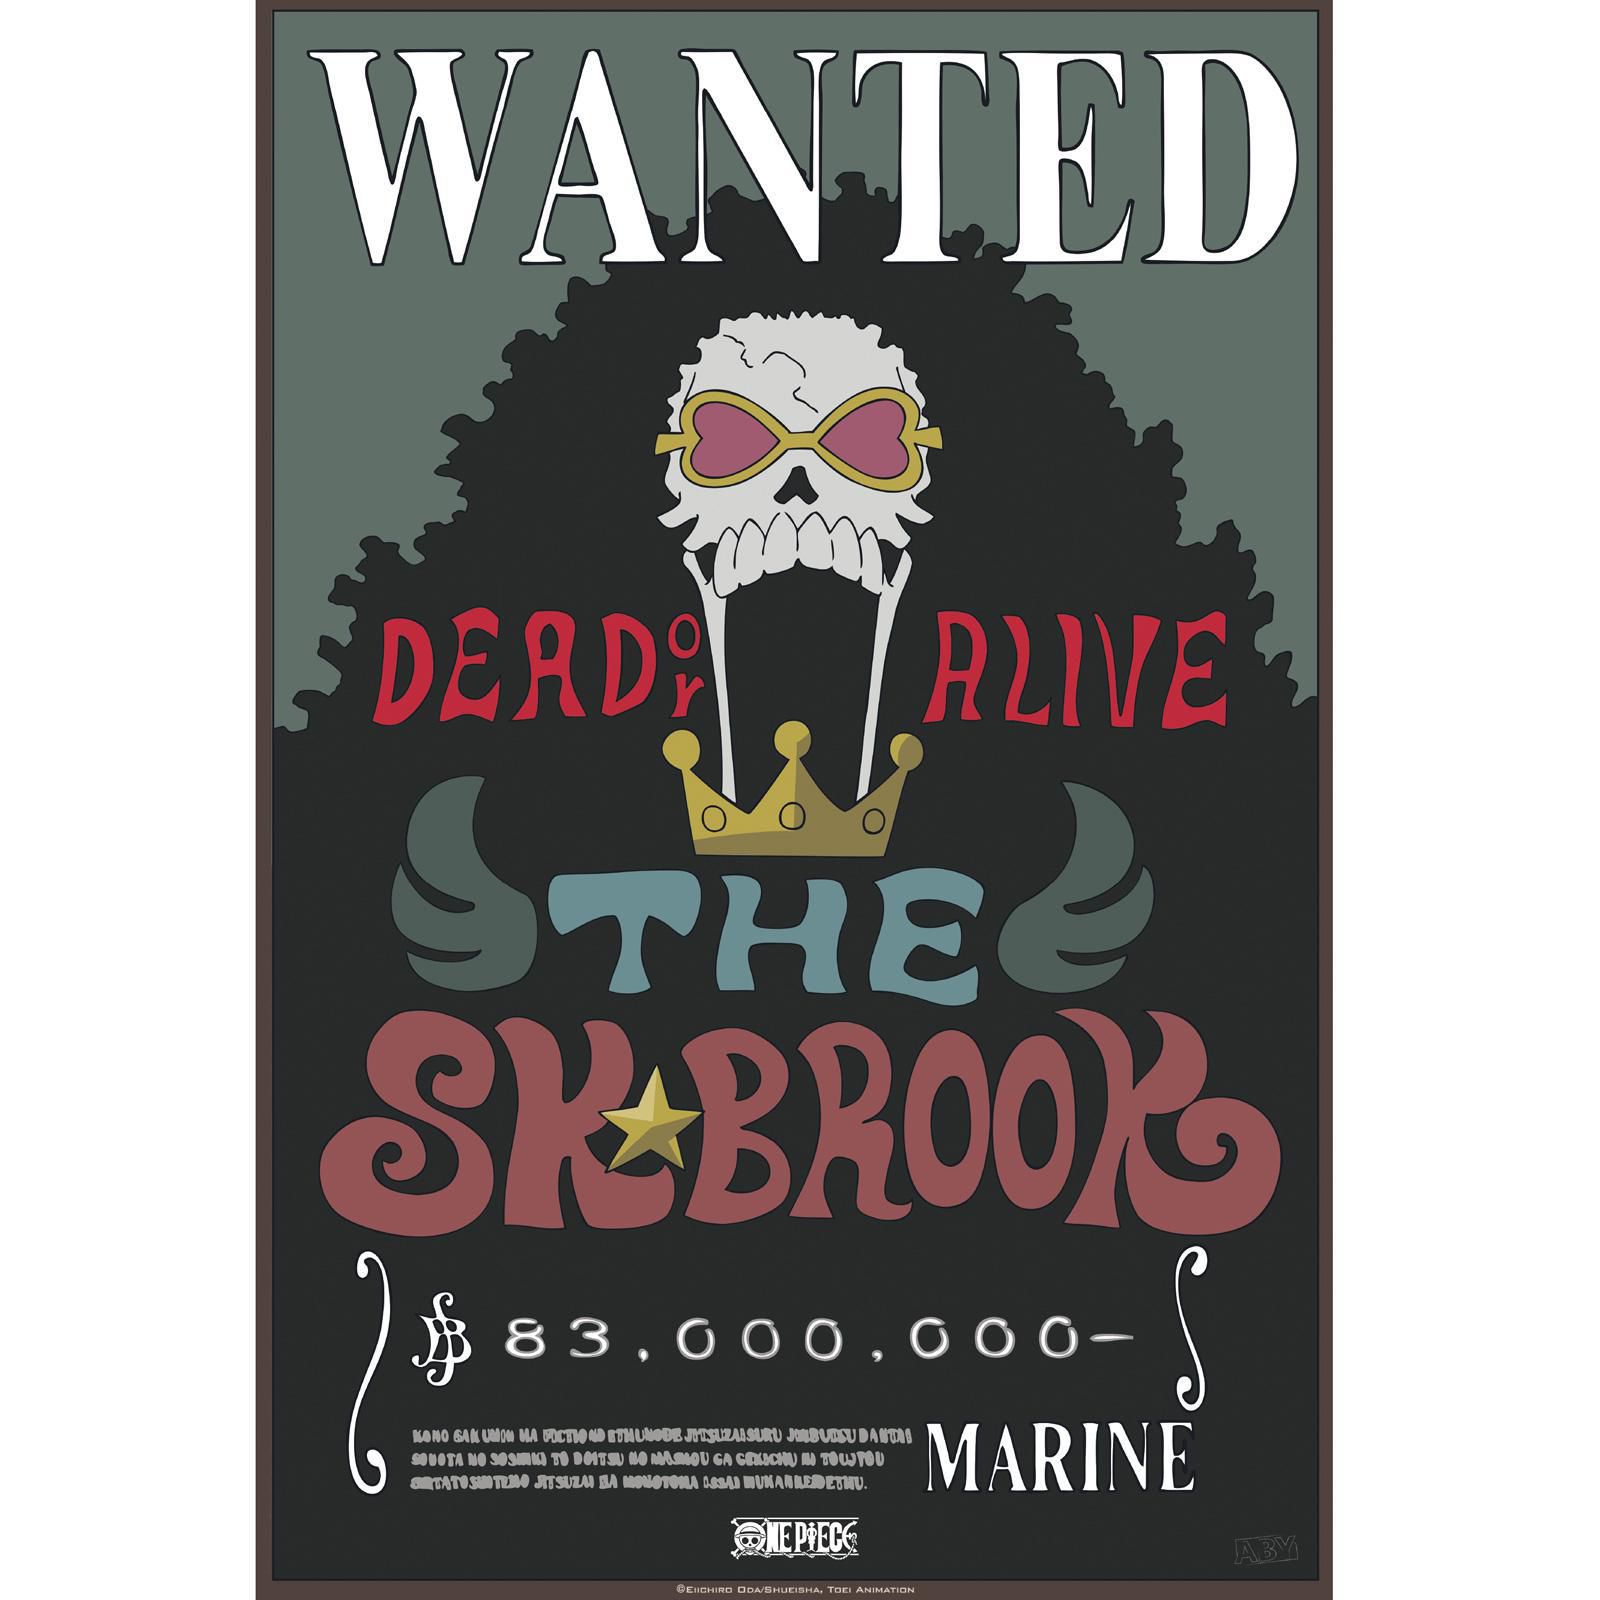 ABYSTYLE ABYDCO706 ONE Poster PIECE CHOPPER BROOK & WANTED